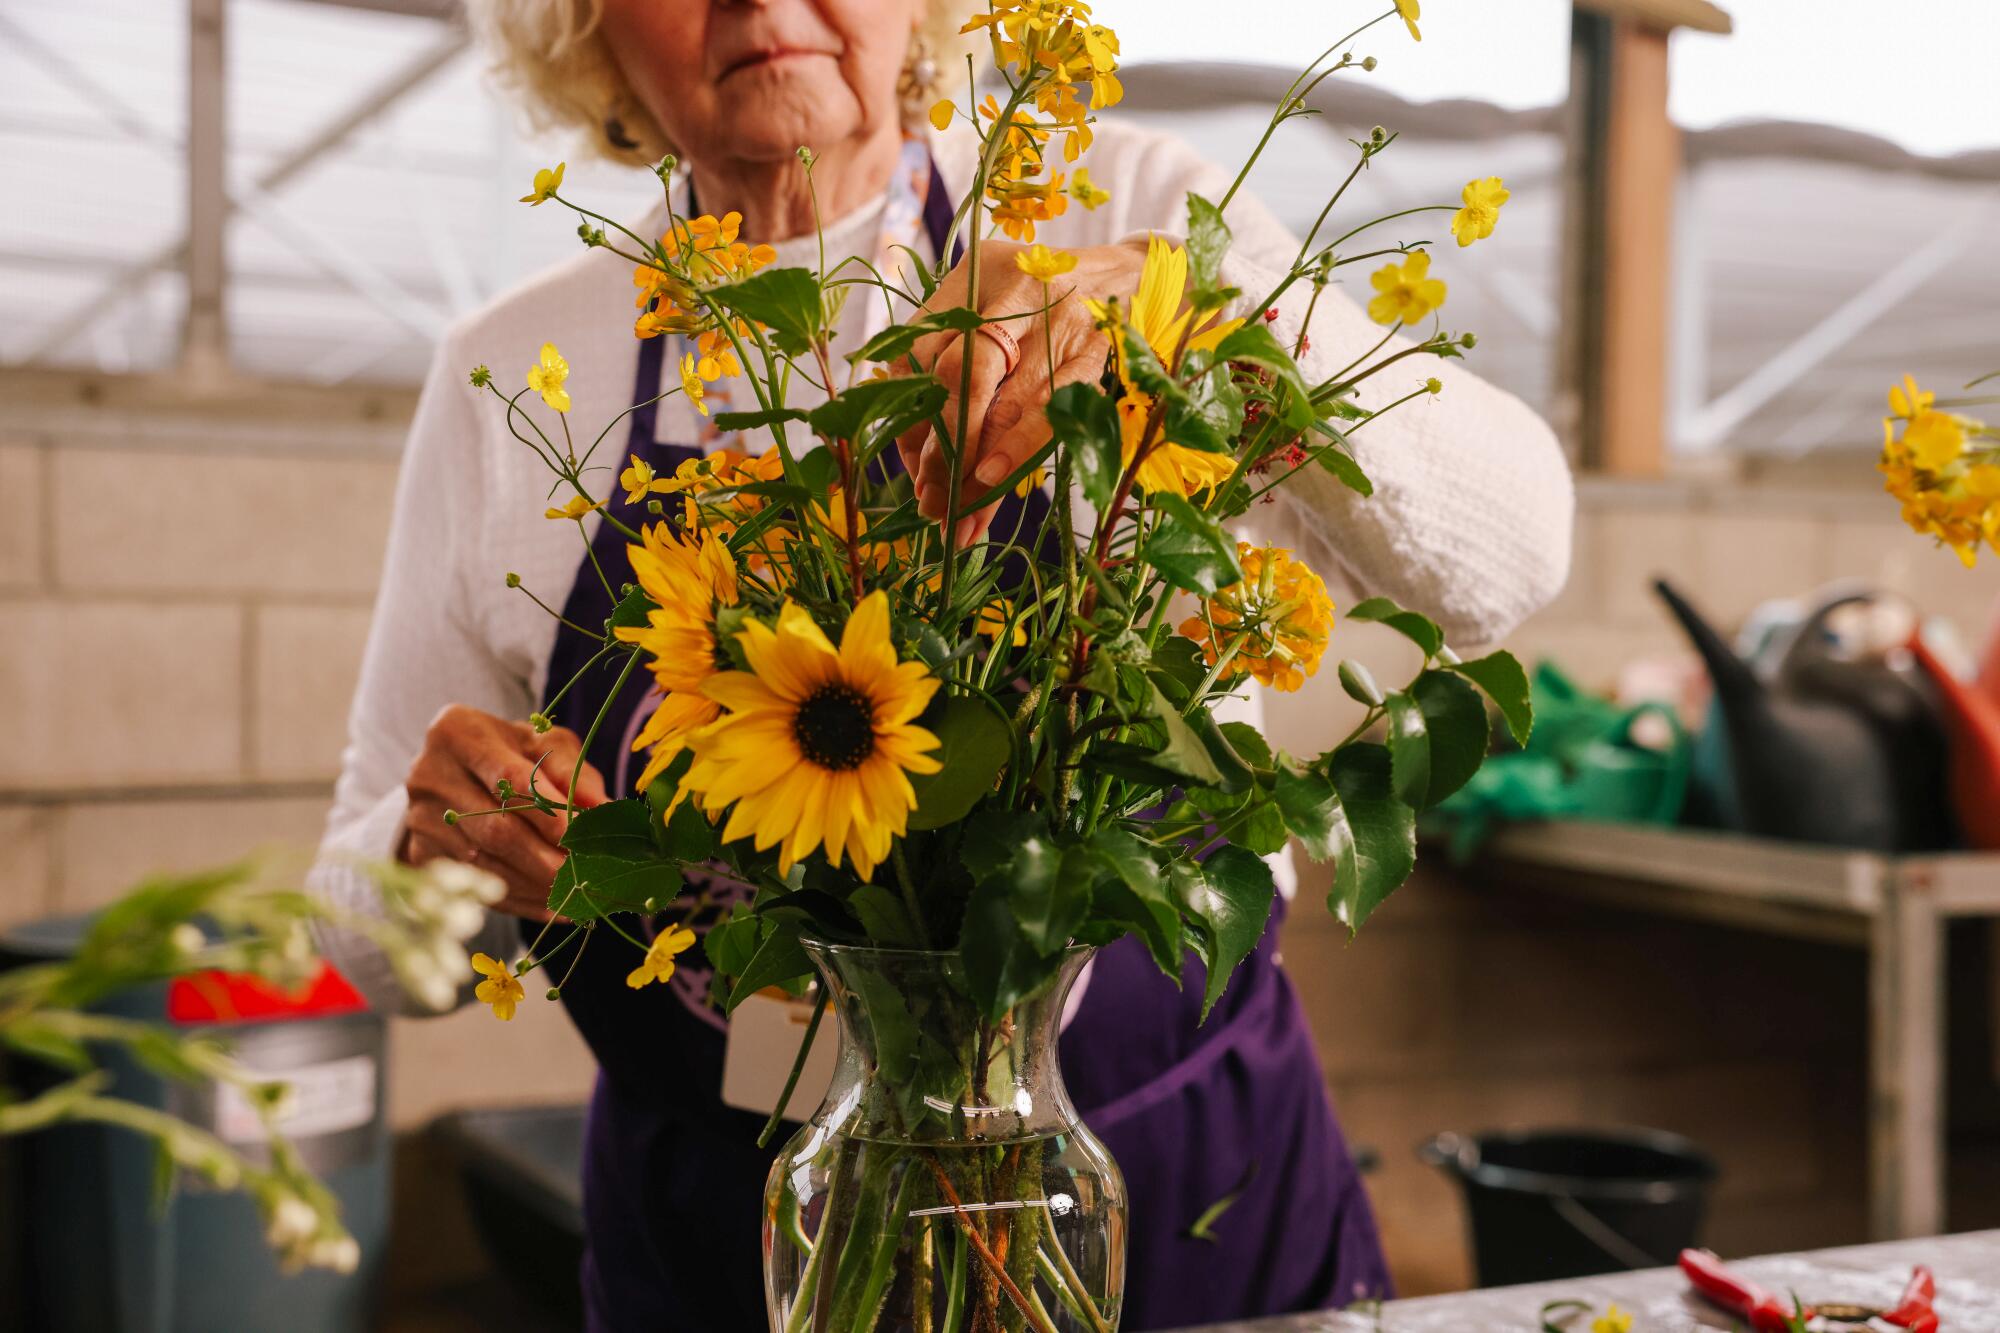 A woman assembles a bouquet made from native foliage and flowers.